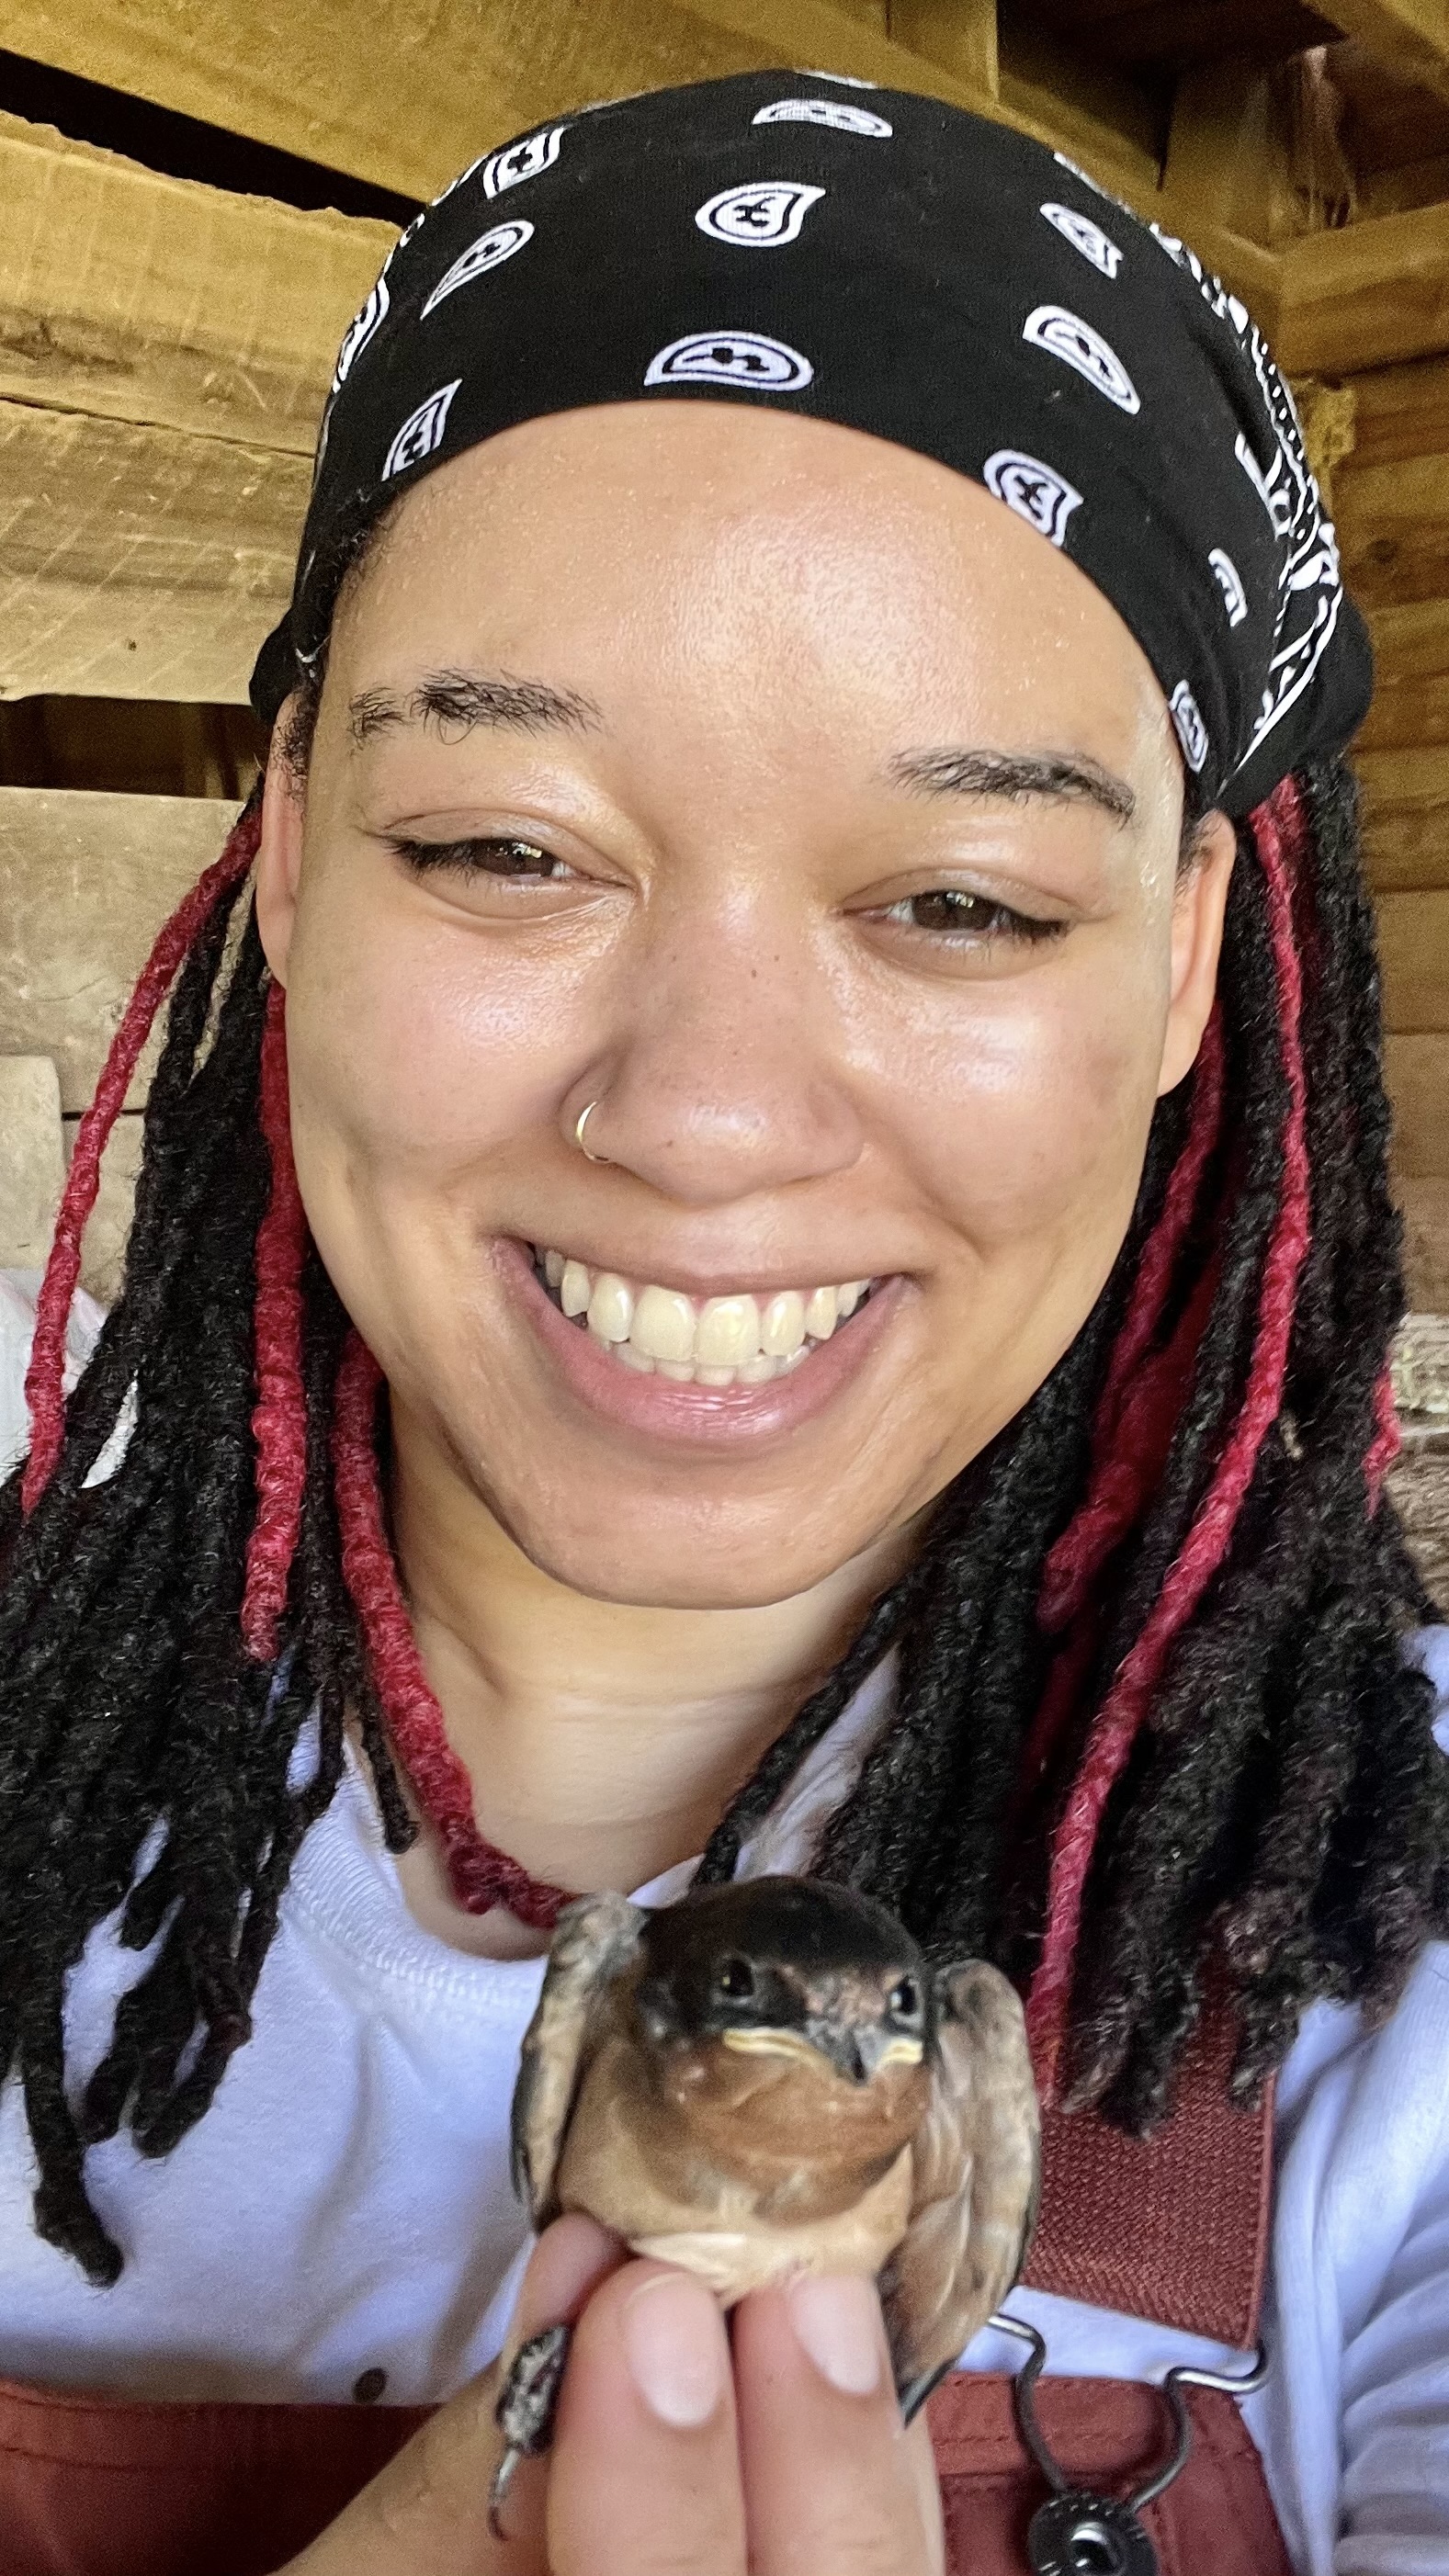 A smiling woman wearing a bandana holds a bird in her hand